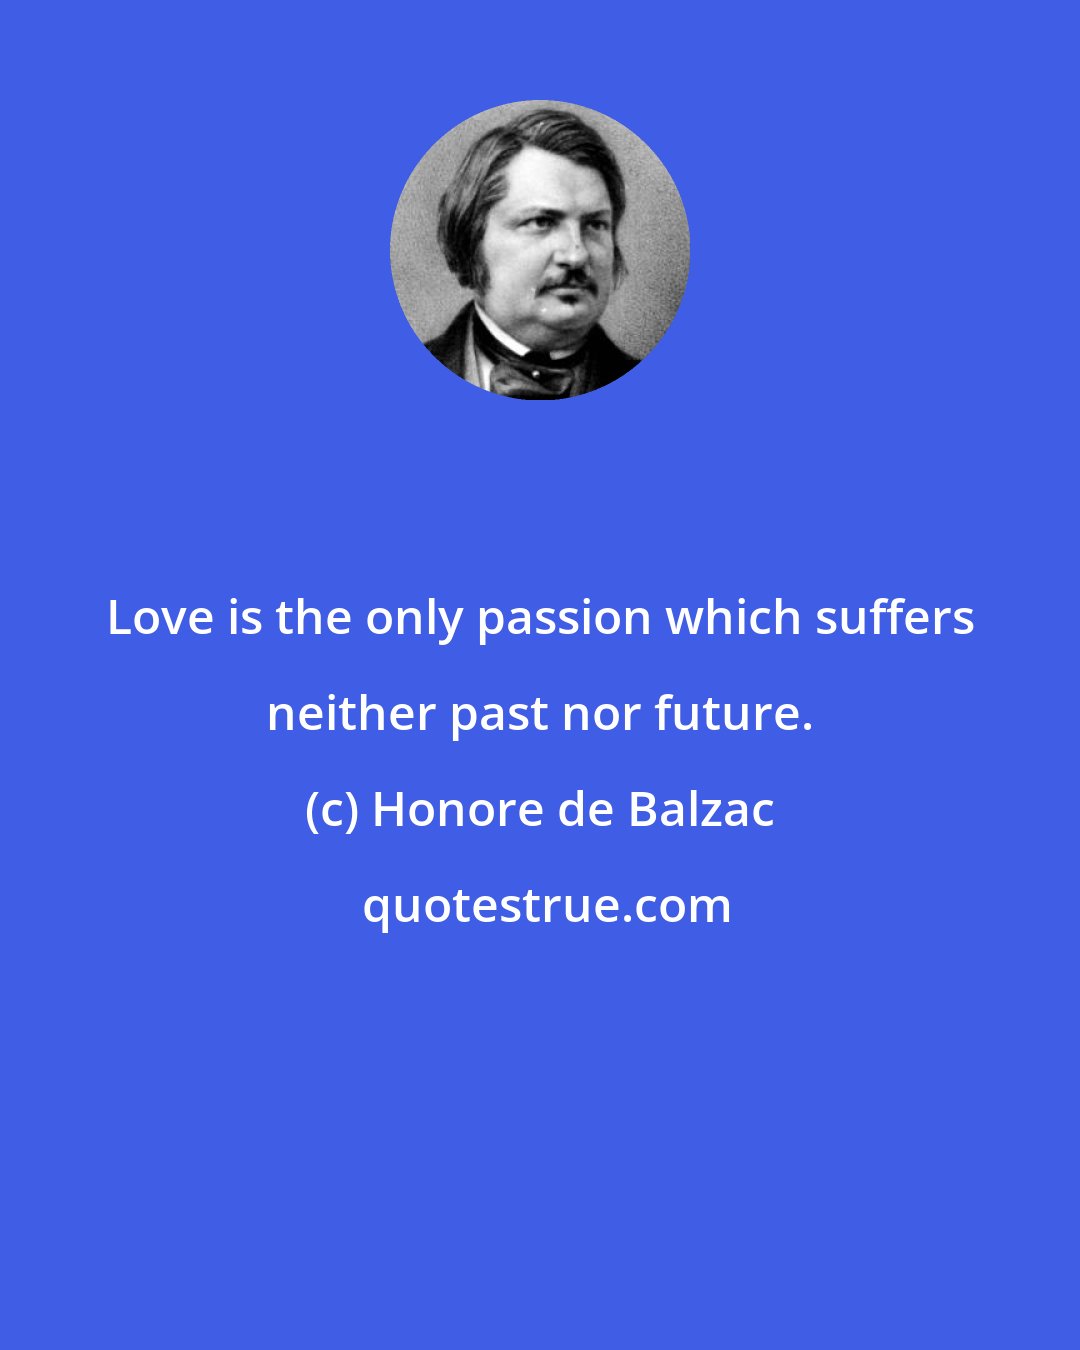 Honore de Balzac: Love is the only passion which suffers neither past nor future.